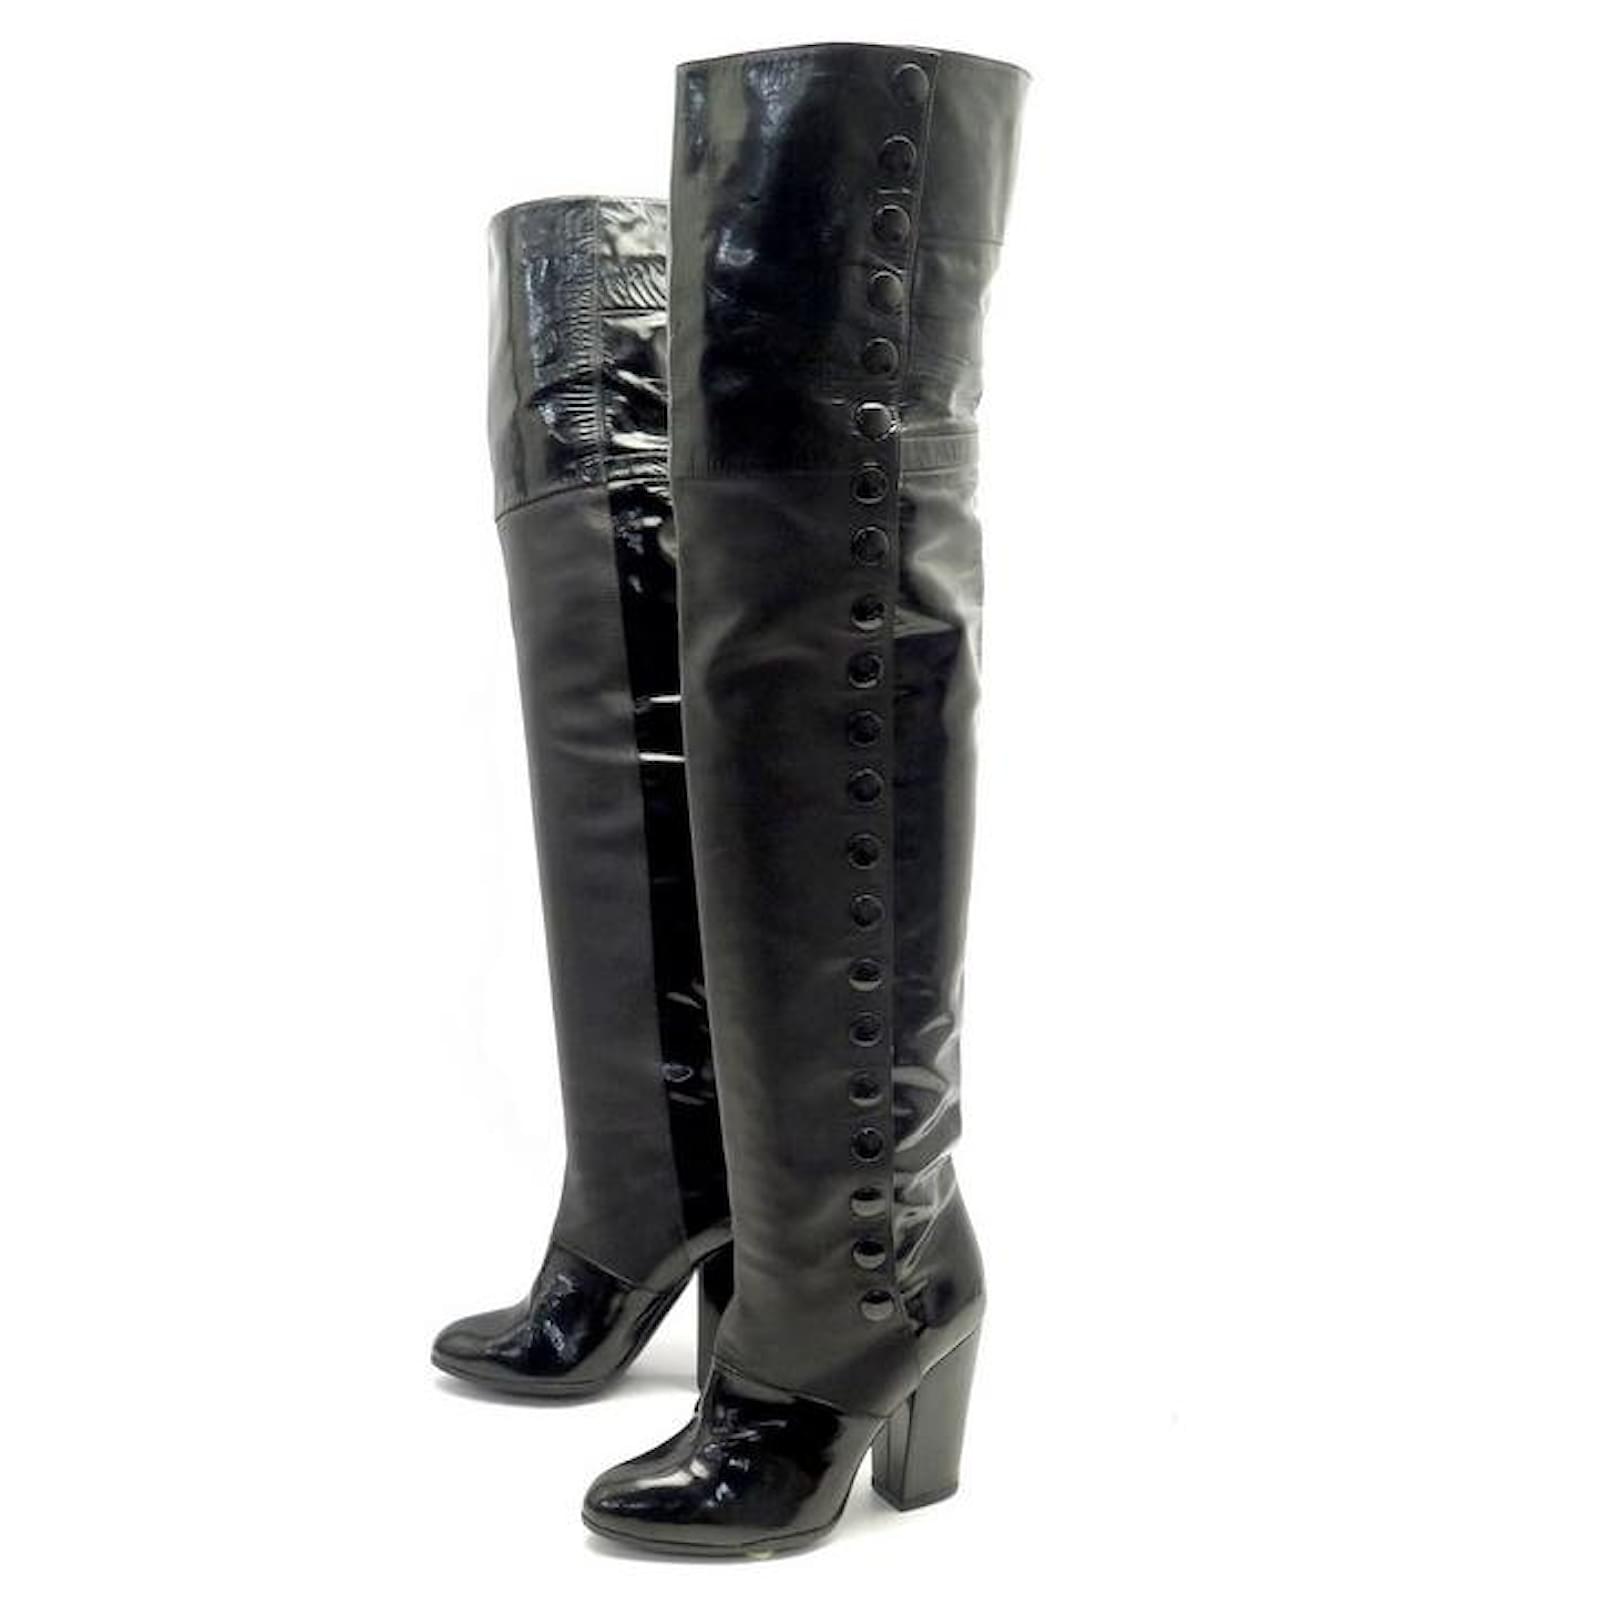 SHOES BOOTS CHANEL G26293 Thigh high boots 37 BLACK PATENT LEATHER BLACK  BOOTS